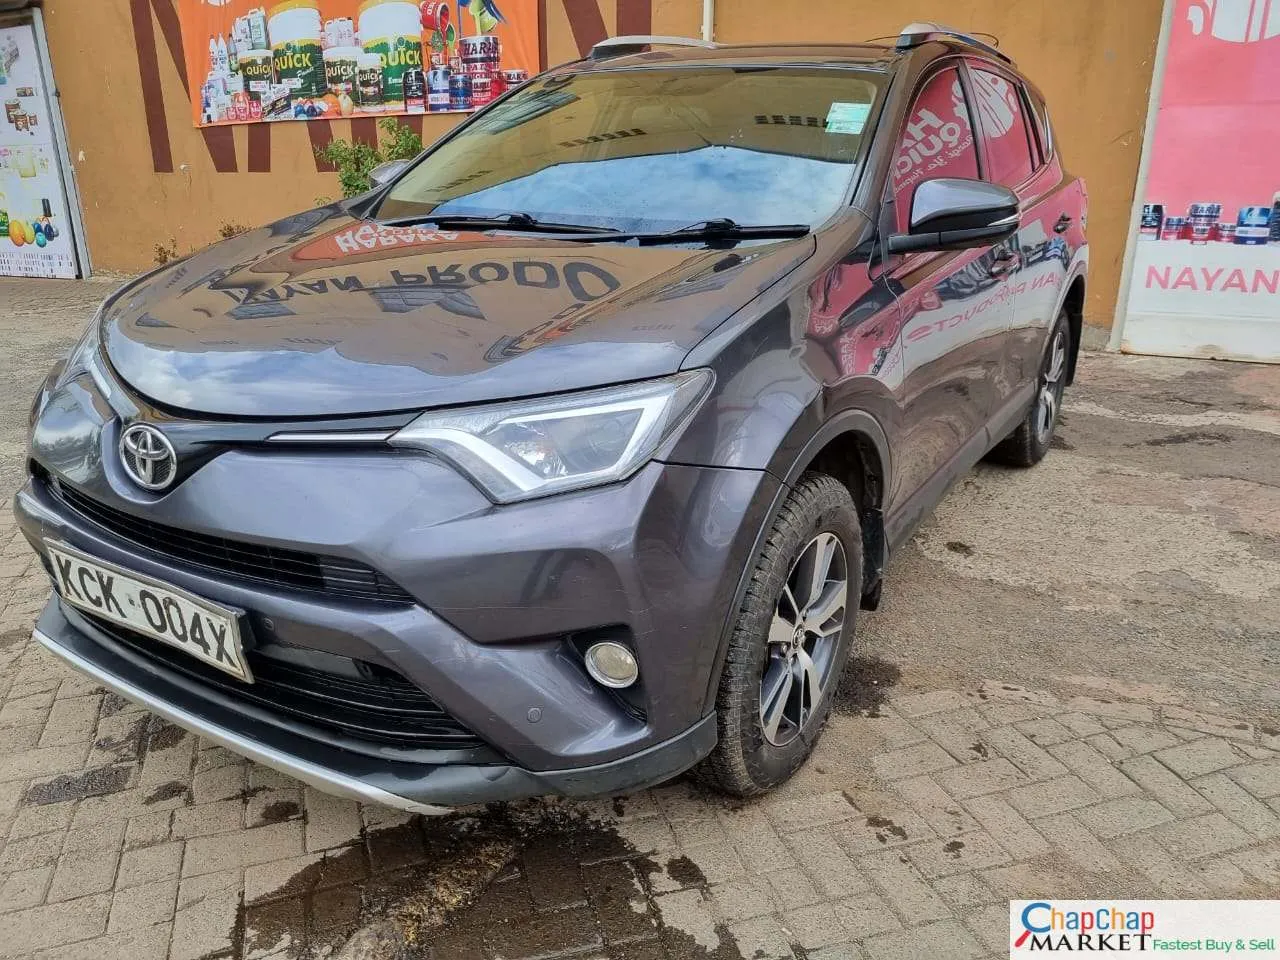 Cars Cars For Sale-Toyota RAV4 locally assembled CHEAPEST New shape Rav4 For sale in kenya hire purchase installments You Pay 30% Deposit Trade in OK EXCLUSIVE 9